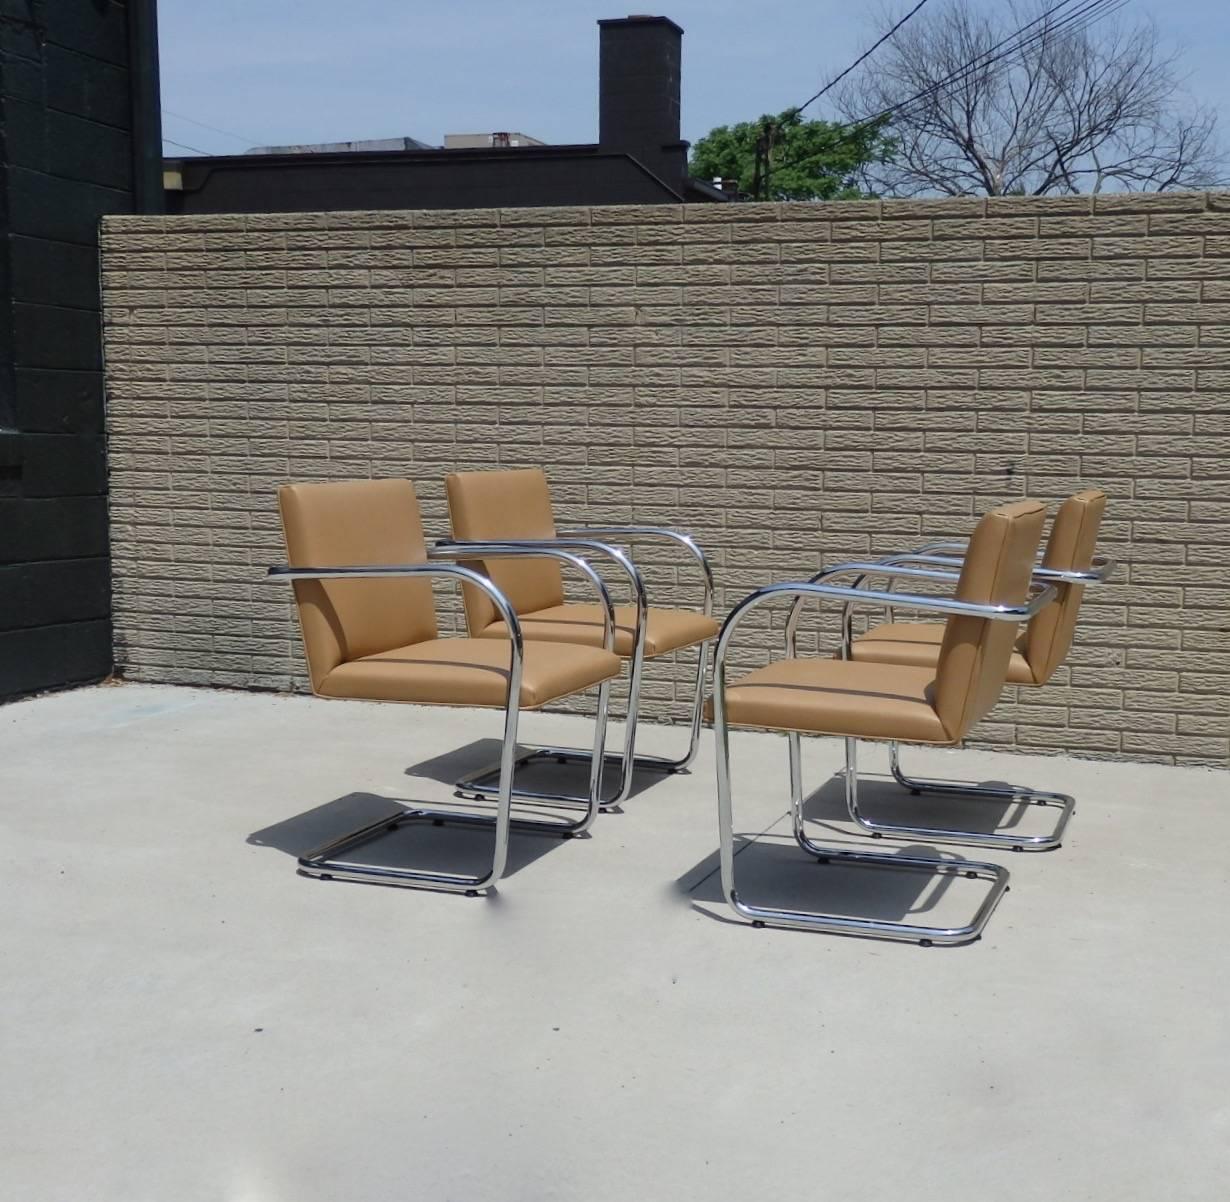 Immaculate set of four Brno chairs. Designed by Mies van der Rohe licensed to Knoll. Signature etched in the arms. Retains paper label underneath. Tubular chrome frames are excellent as is the coffee brown supple Naugahyde.